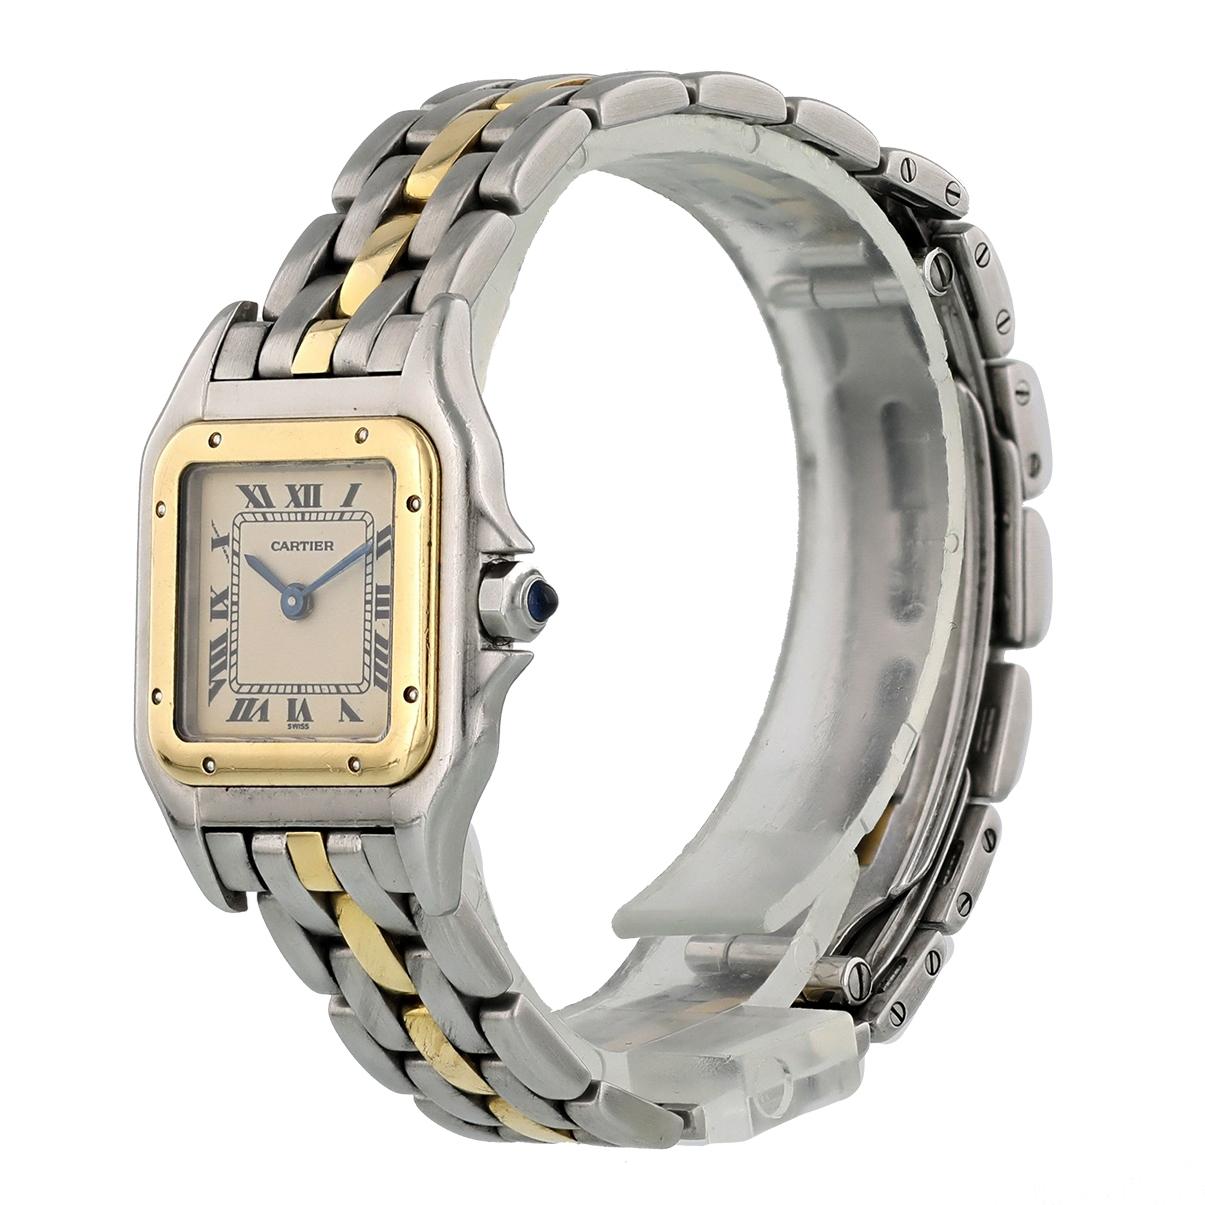 Cartier Panthere 1120 Ladies Watch. 
22mm Stainless Steel case. 
Yellow Gold Stationary bezel. 
Off-White dial with Blue steel hands and roman numeral hour markers. 
Minute markers on the inner dial. 
Two Tone Stainless Steel Bracelet with Butterfly